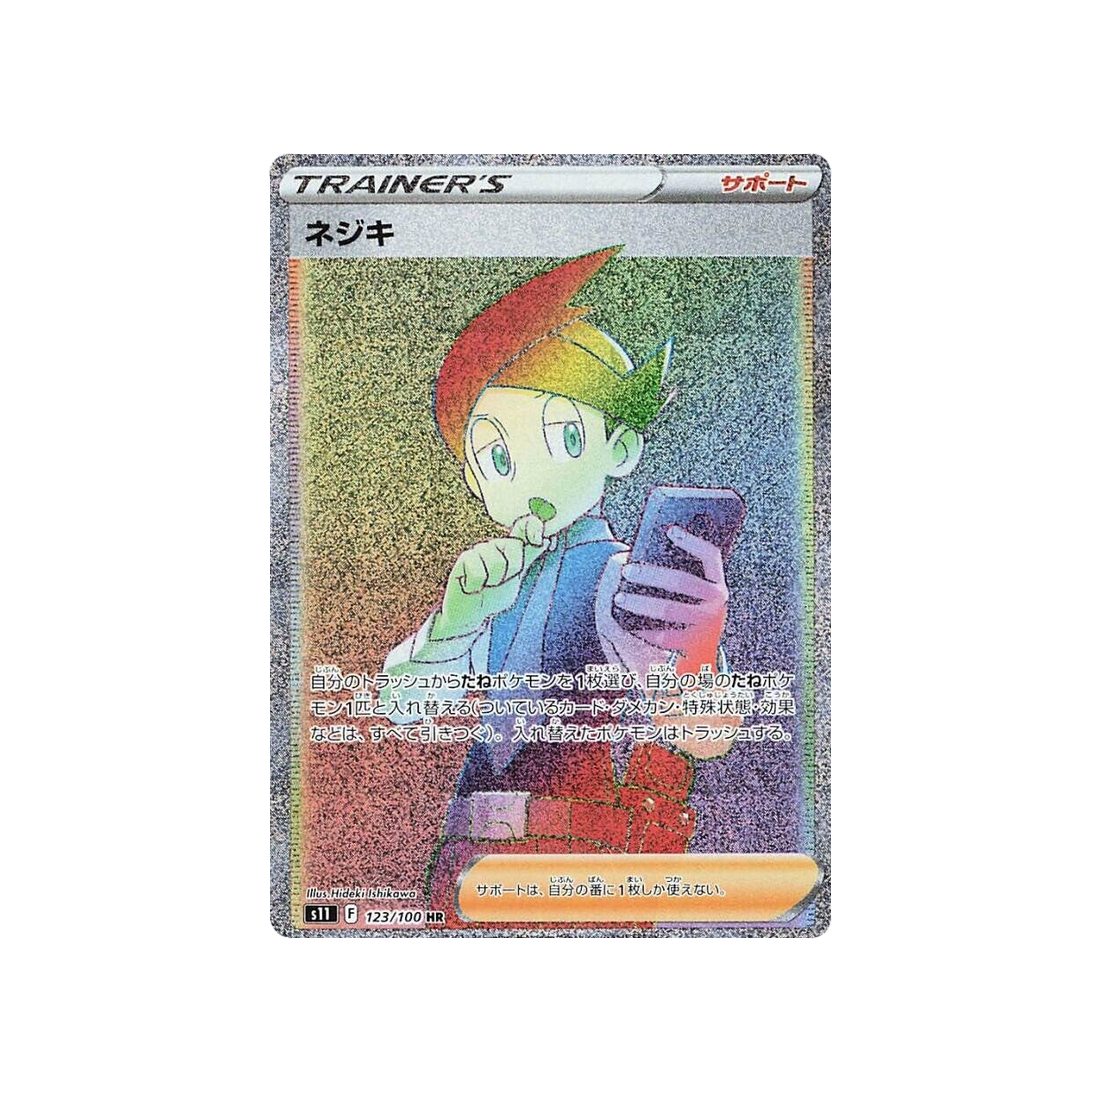 cardus-carte-pokemon-lost-abyss-s11-123